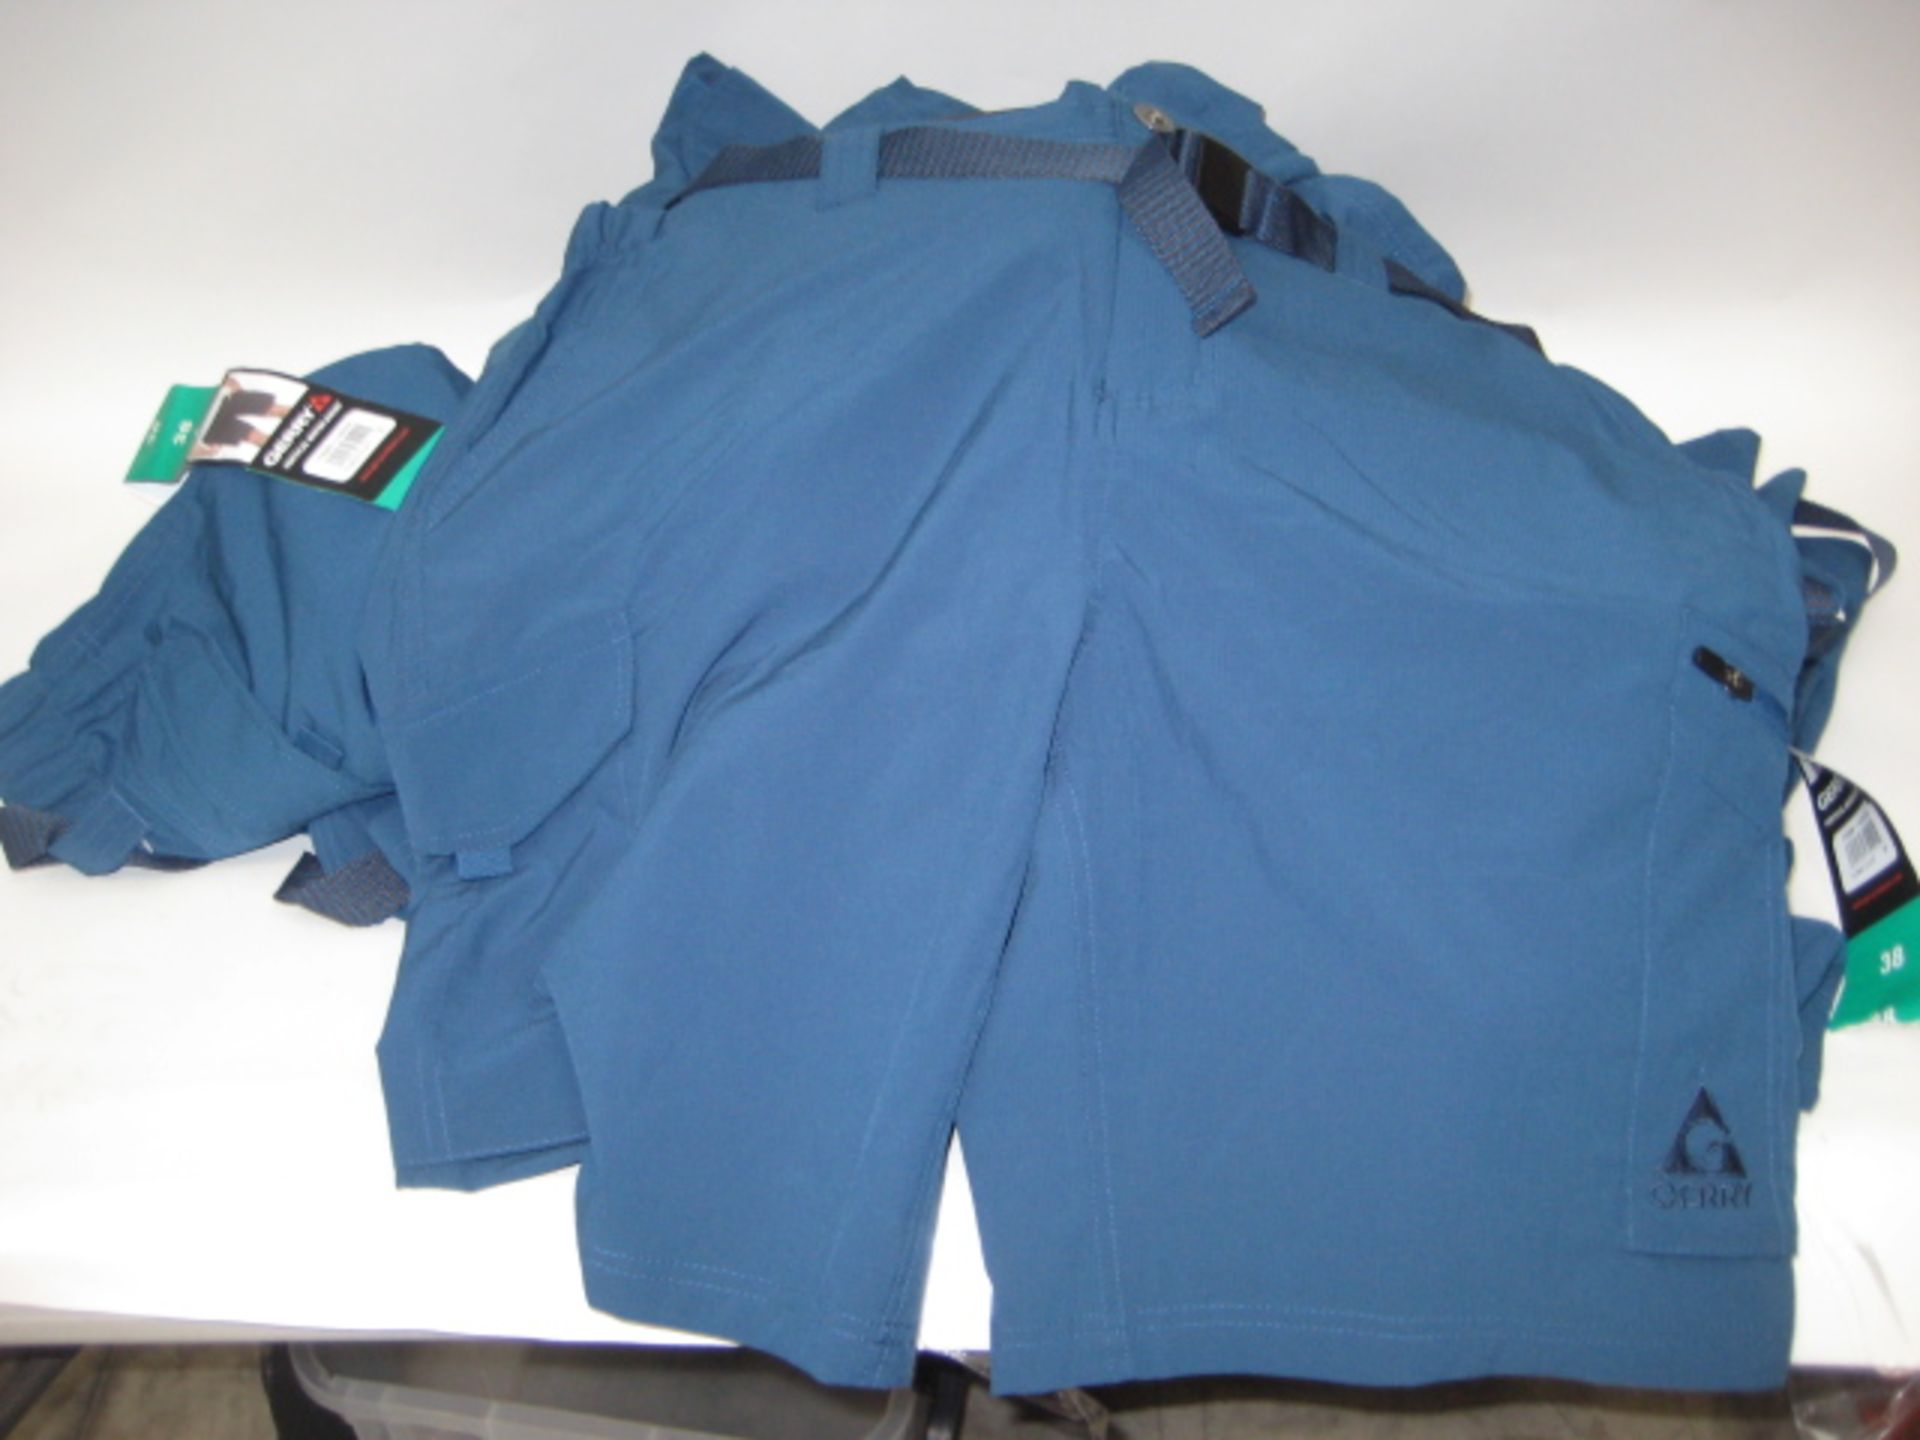 Bag containing 18 Jerry gents shorts in blue sizes mainly 38''